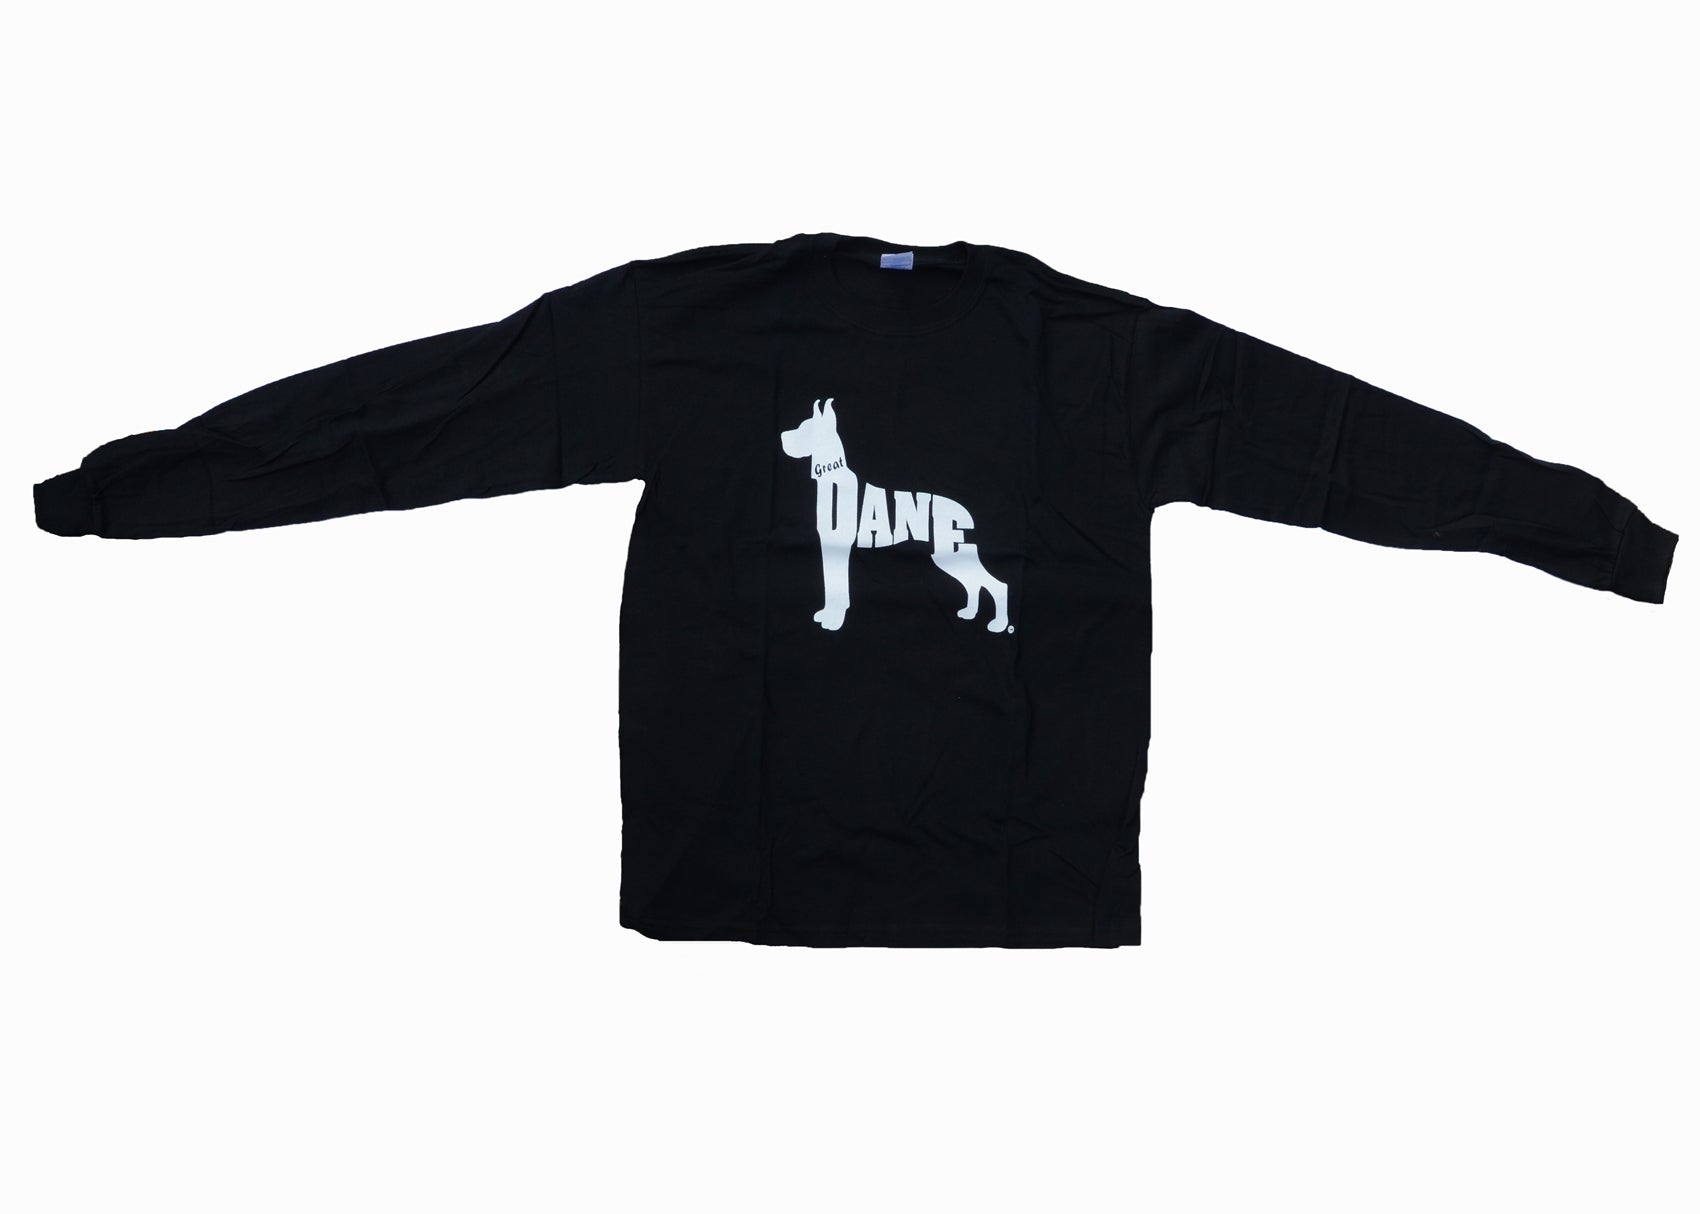 "Great Dane Long Sleeved T-Shirt" - limited supply